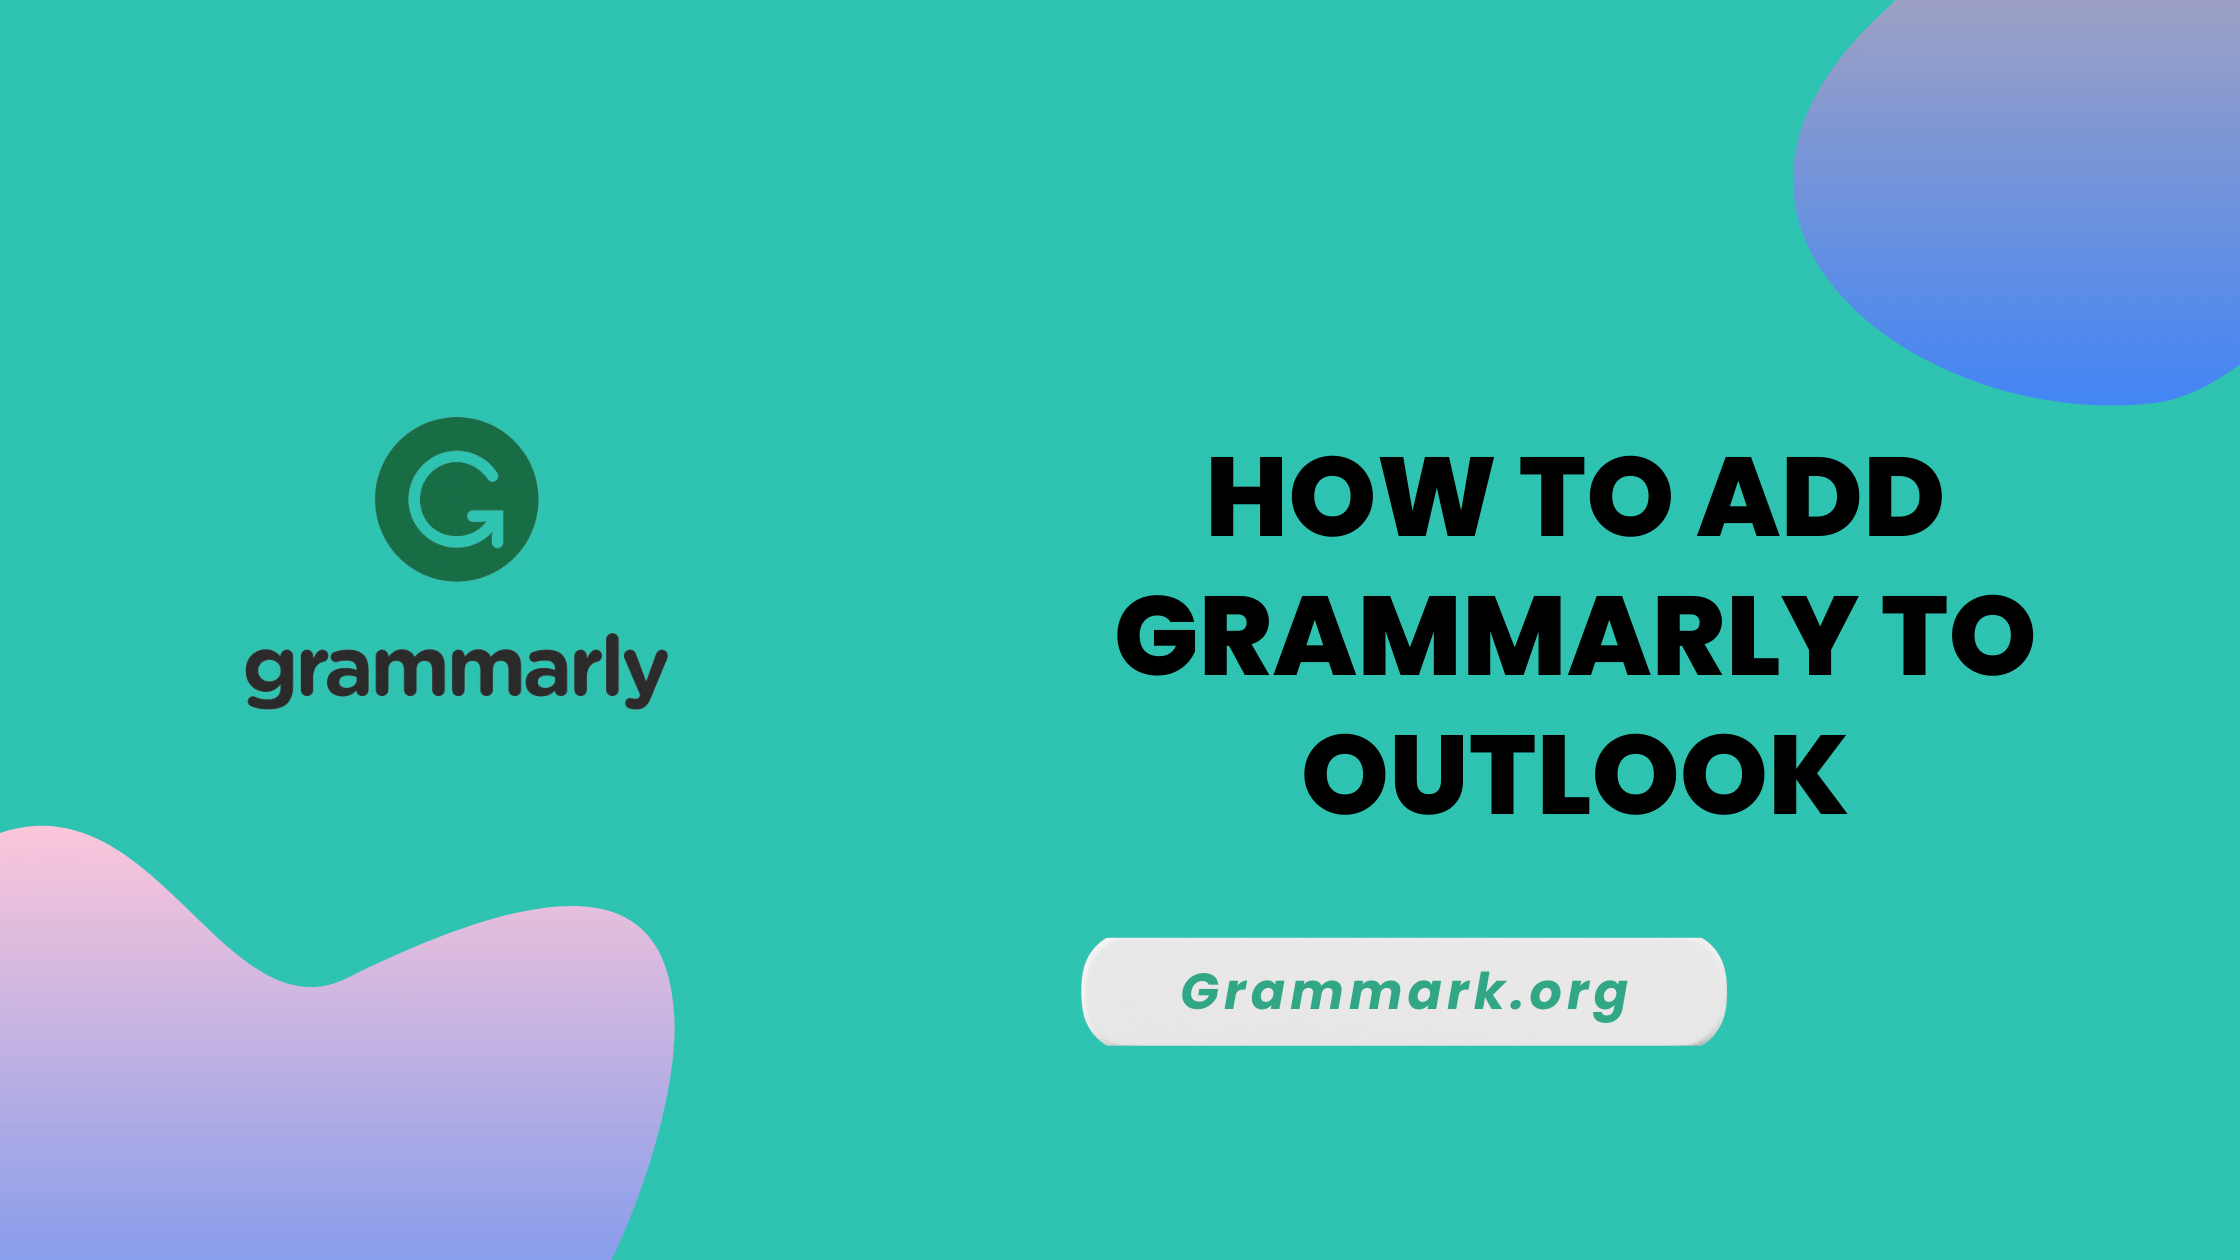 grammarly for outlook email free download